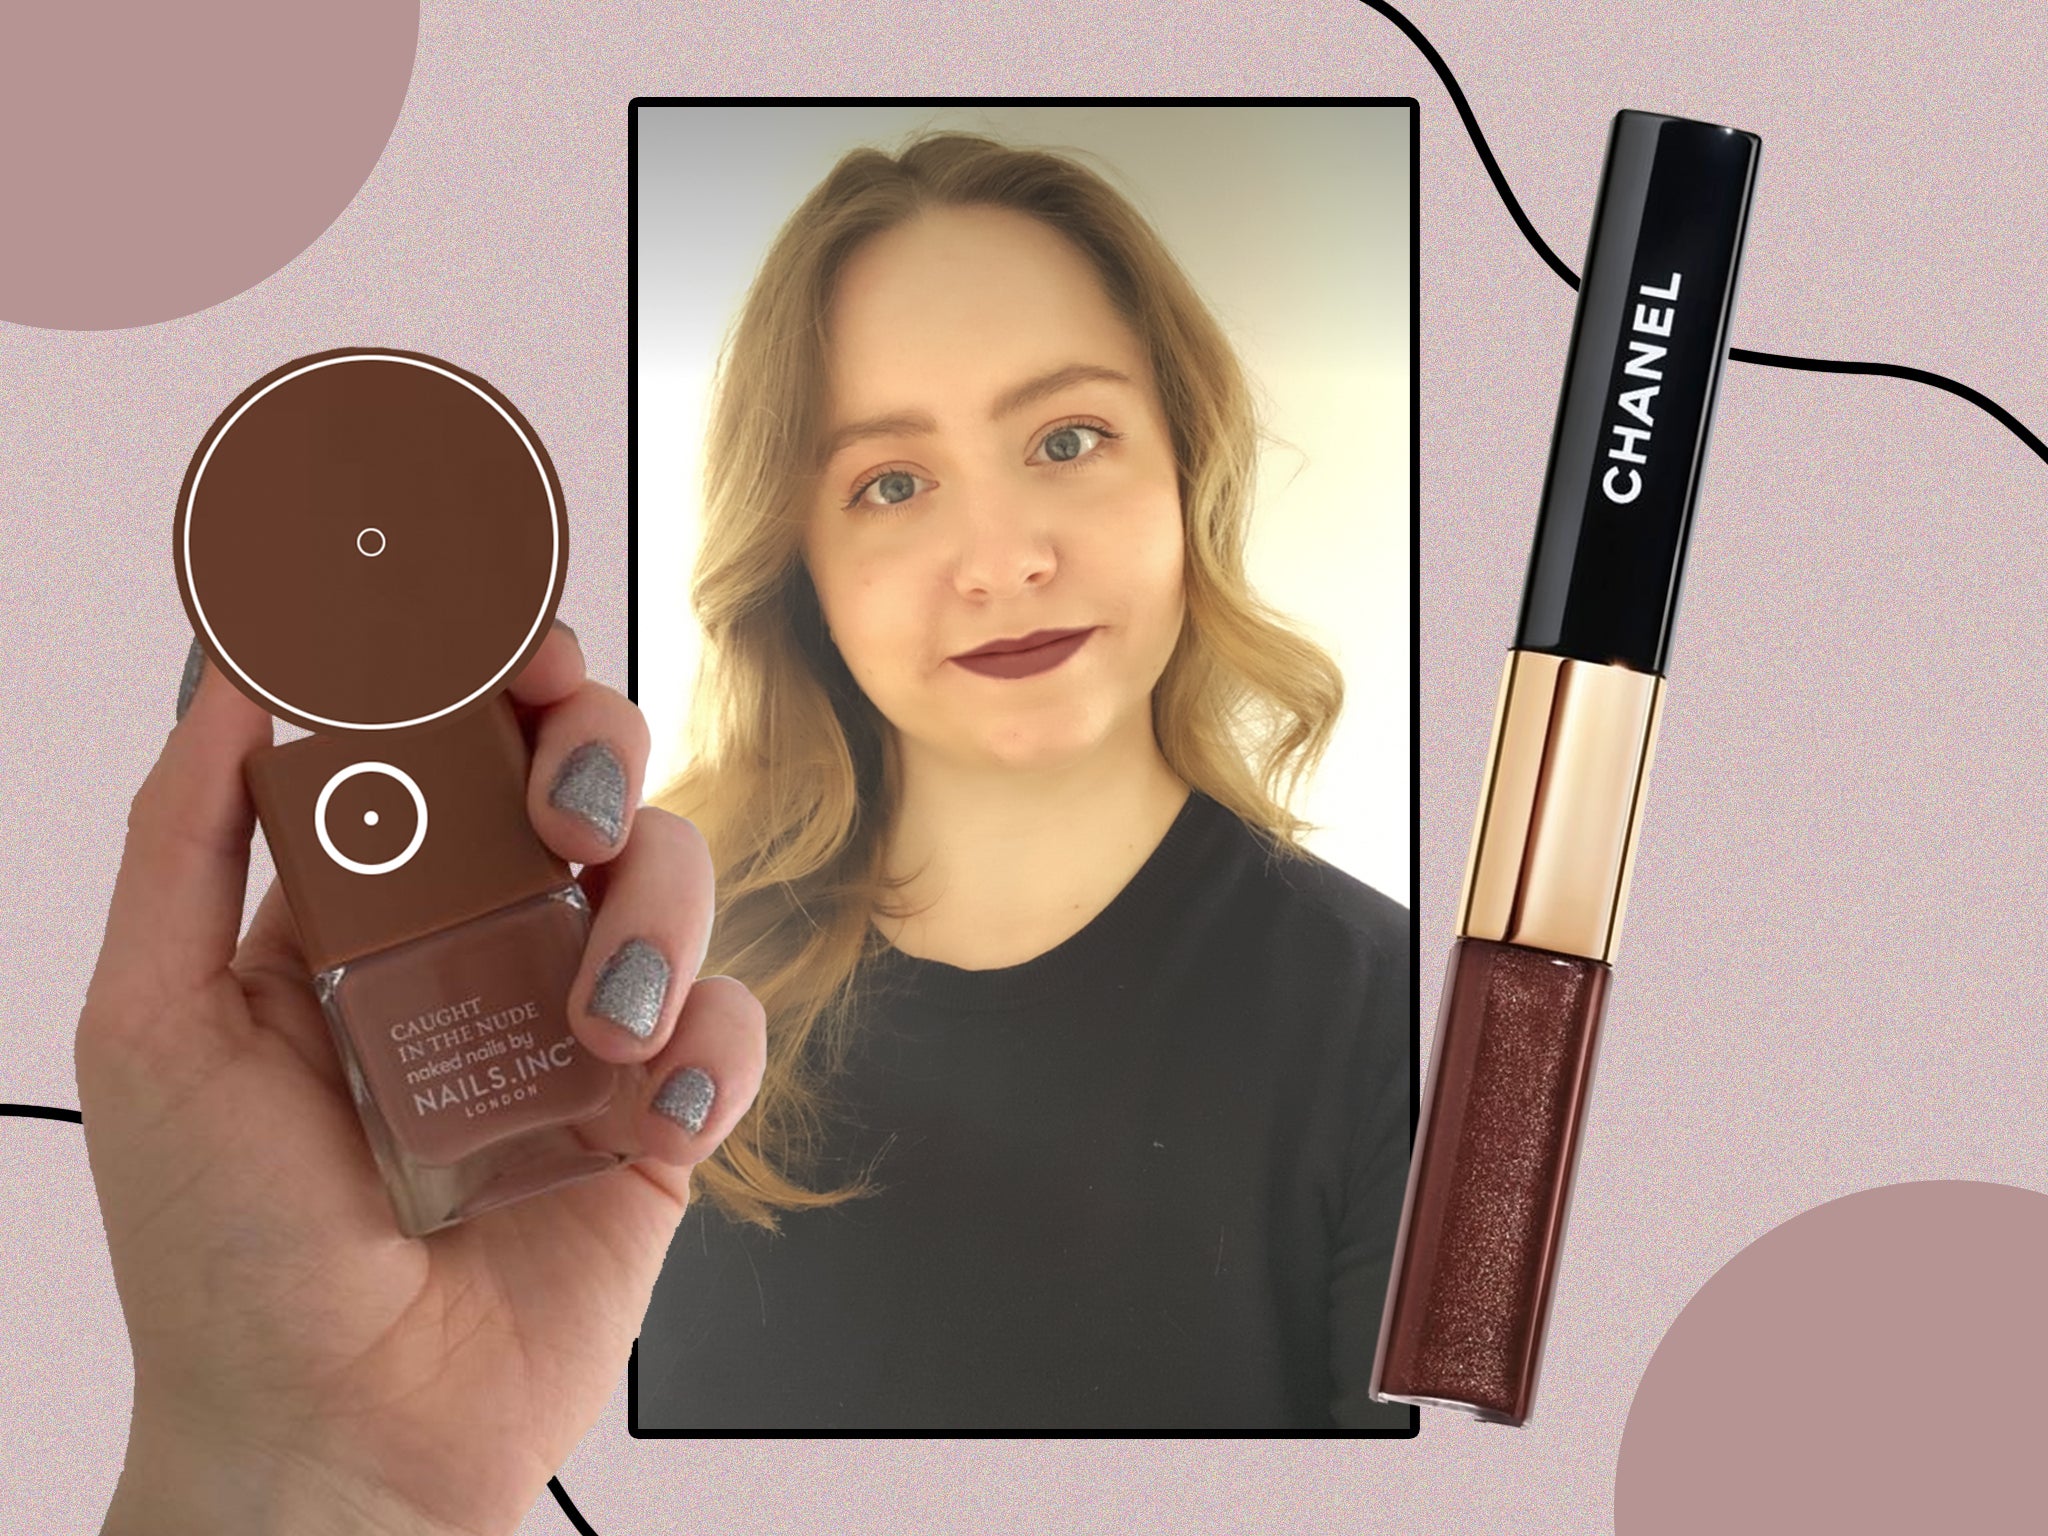 Chanel presents Lipscanner the new app to find your lipstick